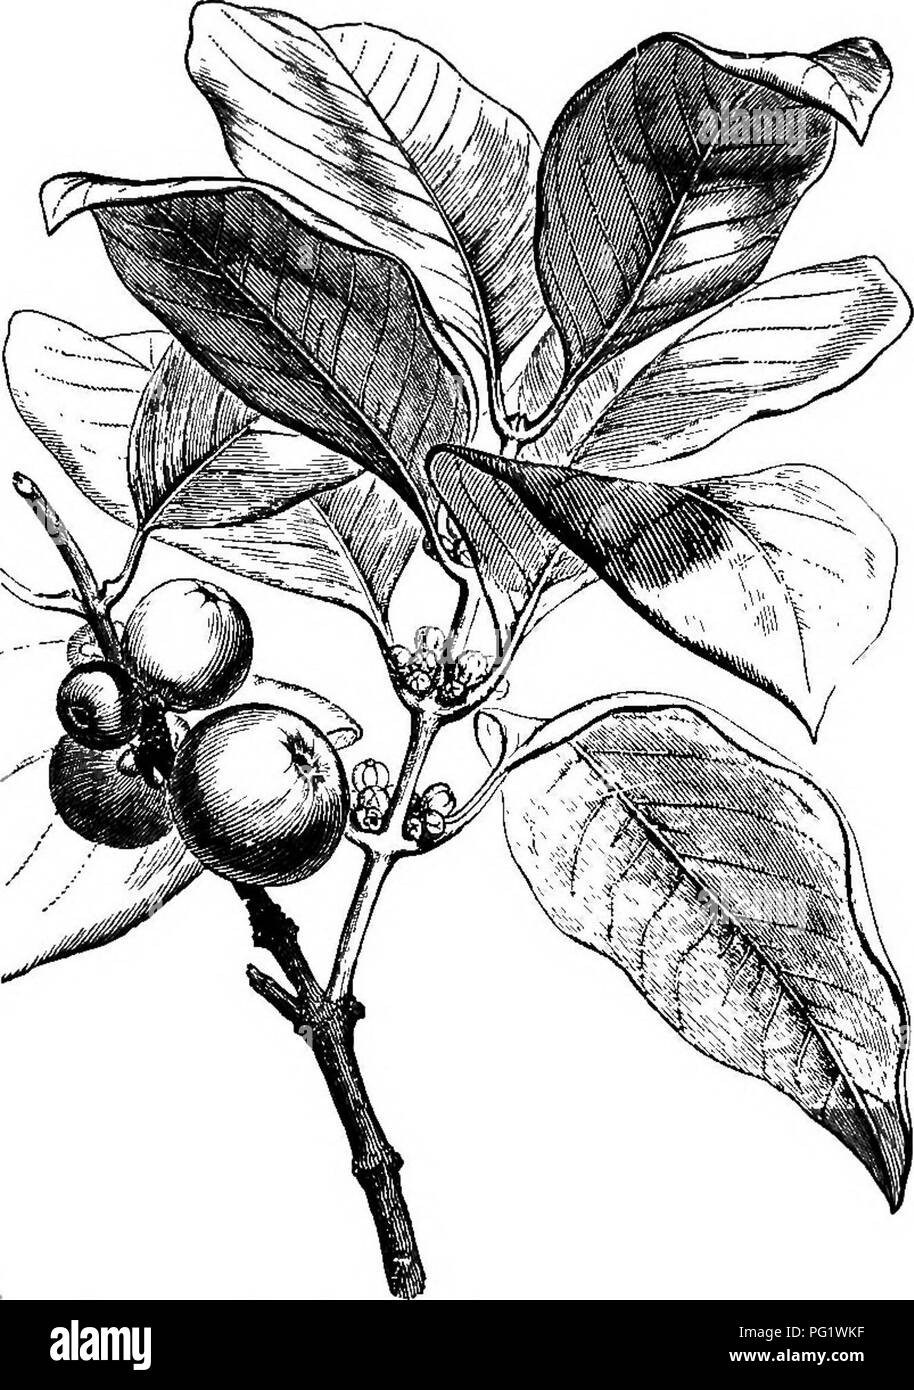 . The natural history of plants. Botany. LYI. CLUSIACEiE. I. OLUSIA SERIES. In this family, wHcli also bears the name of Guttiferce, because it includes the plant which produces the Gum-gutta (fig. 354, 378), Oarcinia Morella.. Fig. 354, Ploriferous and fructiferous brancli. we may first study Clusia^ (fig. 355-860), the fl.owers of which are polygamous or dioecious. The receptacle, slightly convex, bears first ' L. Gen. n. 1154.—Abans. Fam. des PI. ii. 355.—J. Gen. 256.—Lamk. Diet. ii. 52; Silppl. ii. 302 ; III. t.'852.—Cambess. Mem. Mm. xvi. 420.-^-CHOia. Mim. Son. Linn. Par. i. p. ii. (ex D Stock Photo